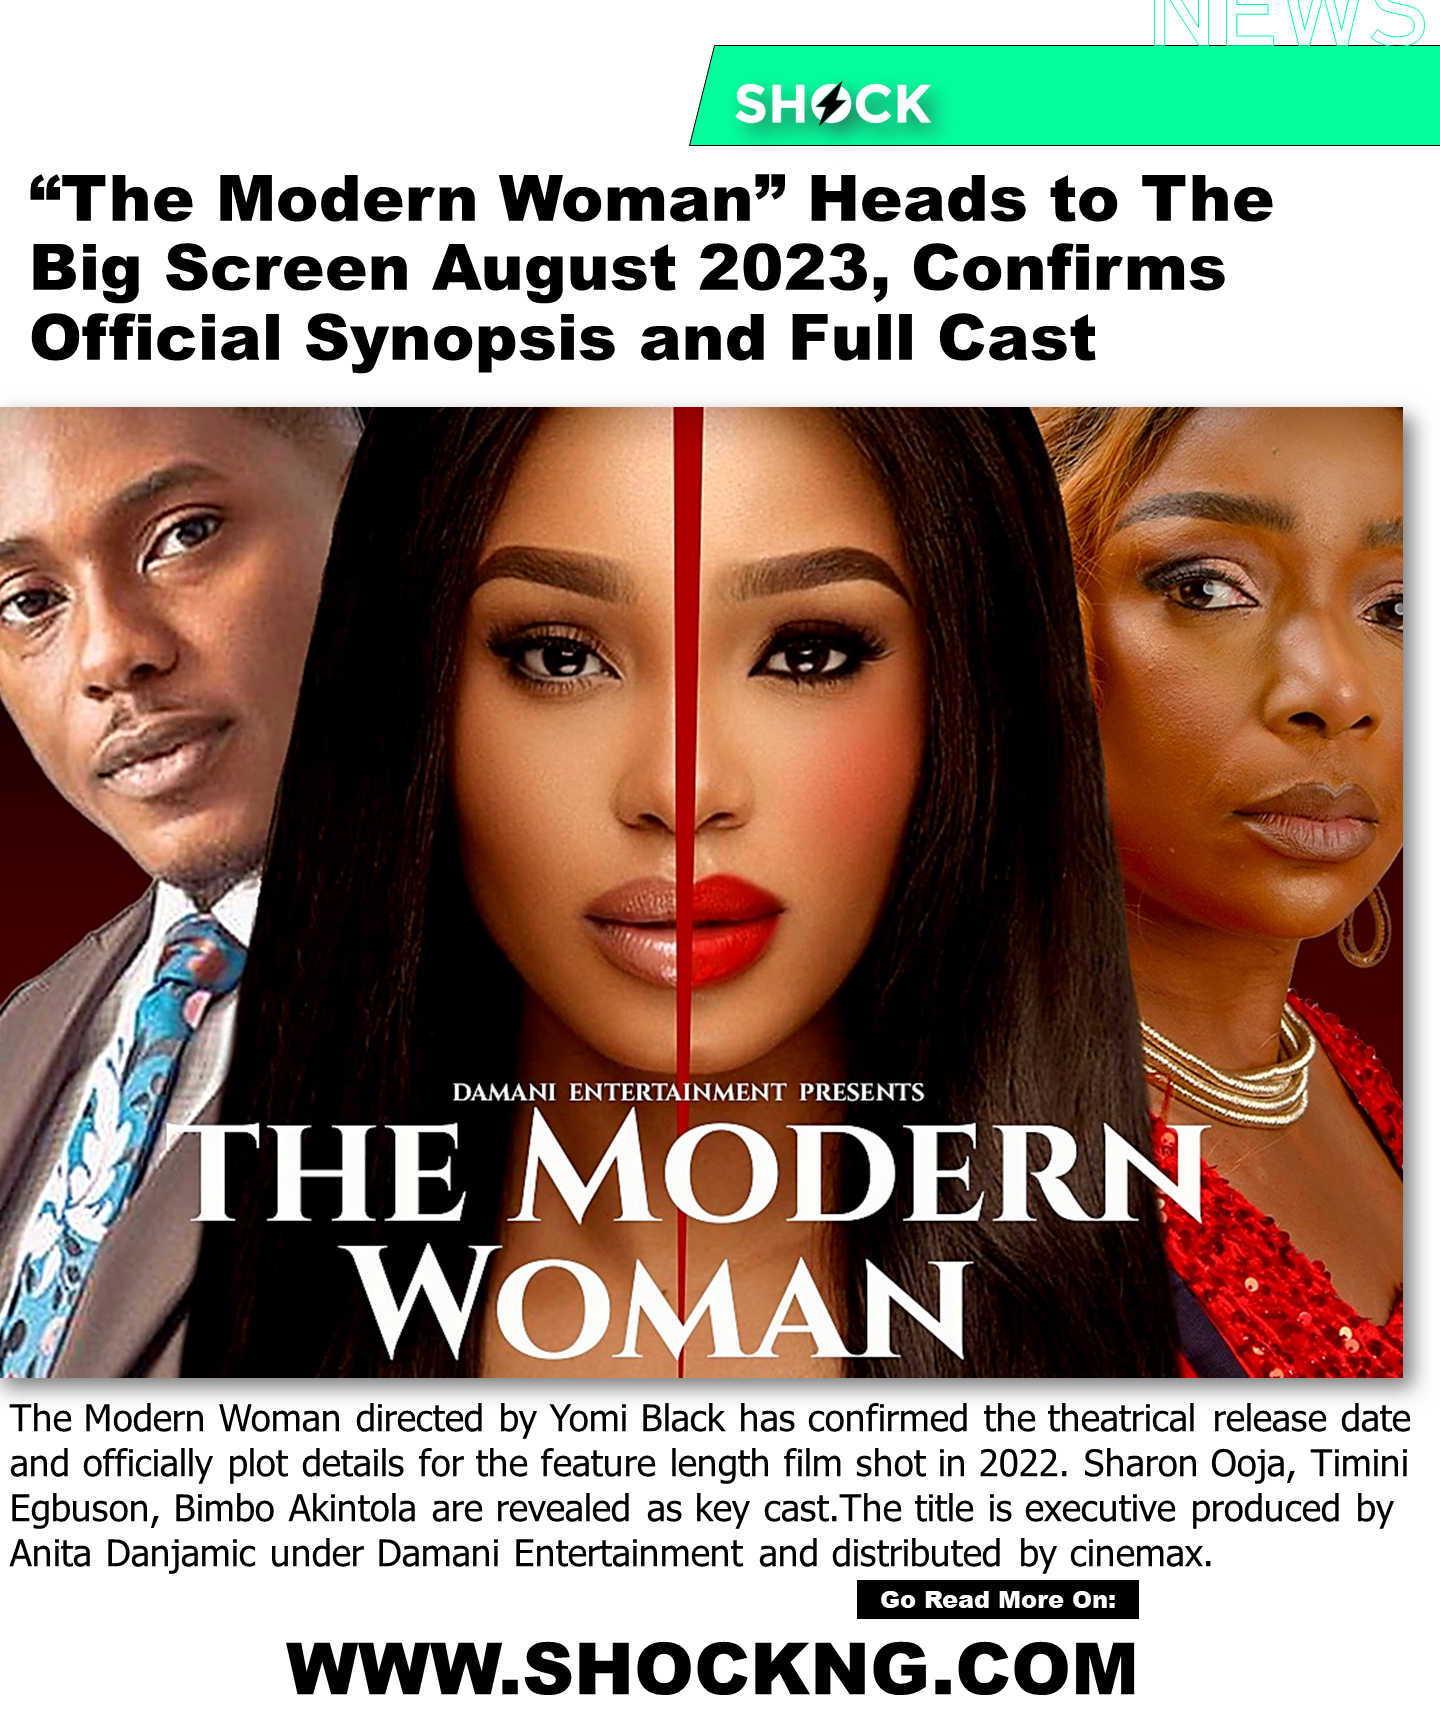 TMW - The Modern Woman Heads to The Big Screen August 2023, Confirms Official Synopsis and Full Cast